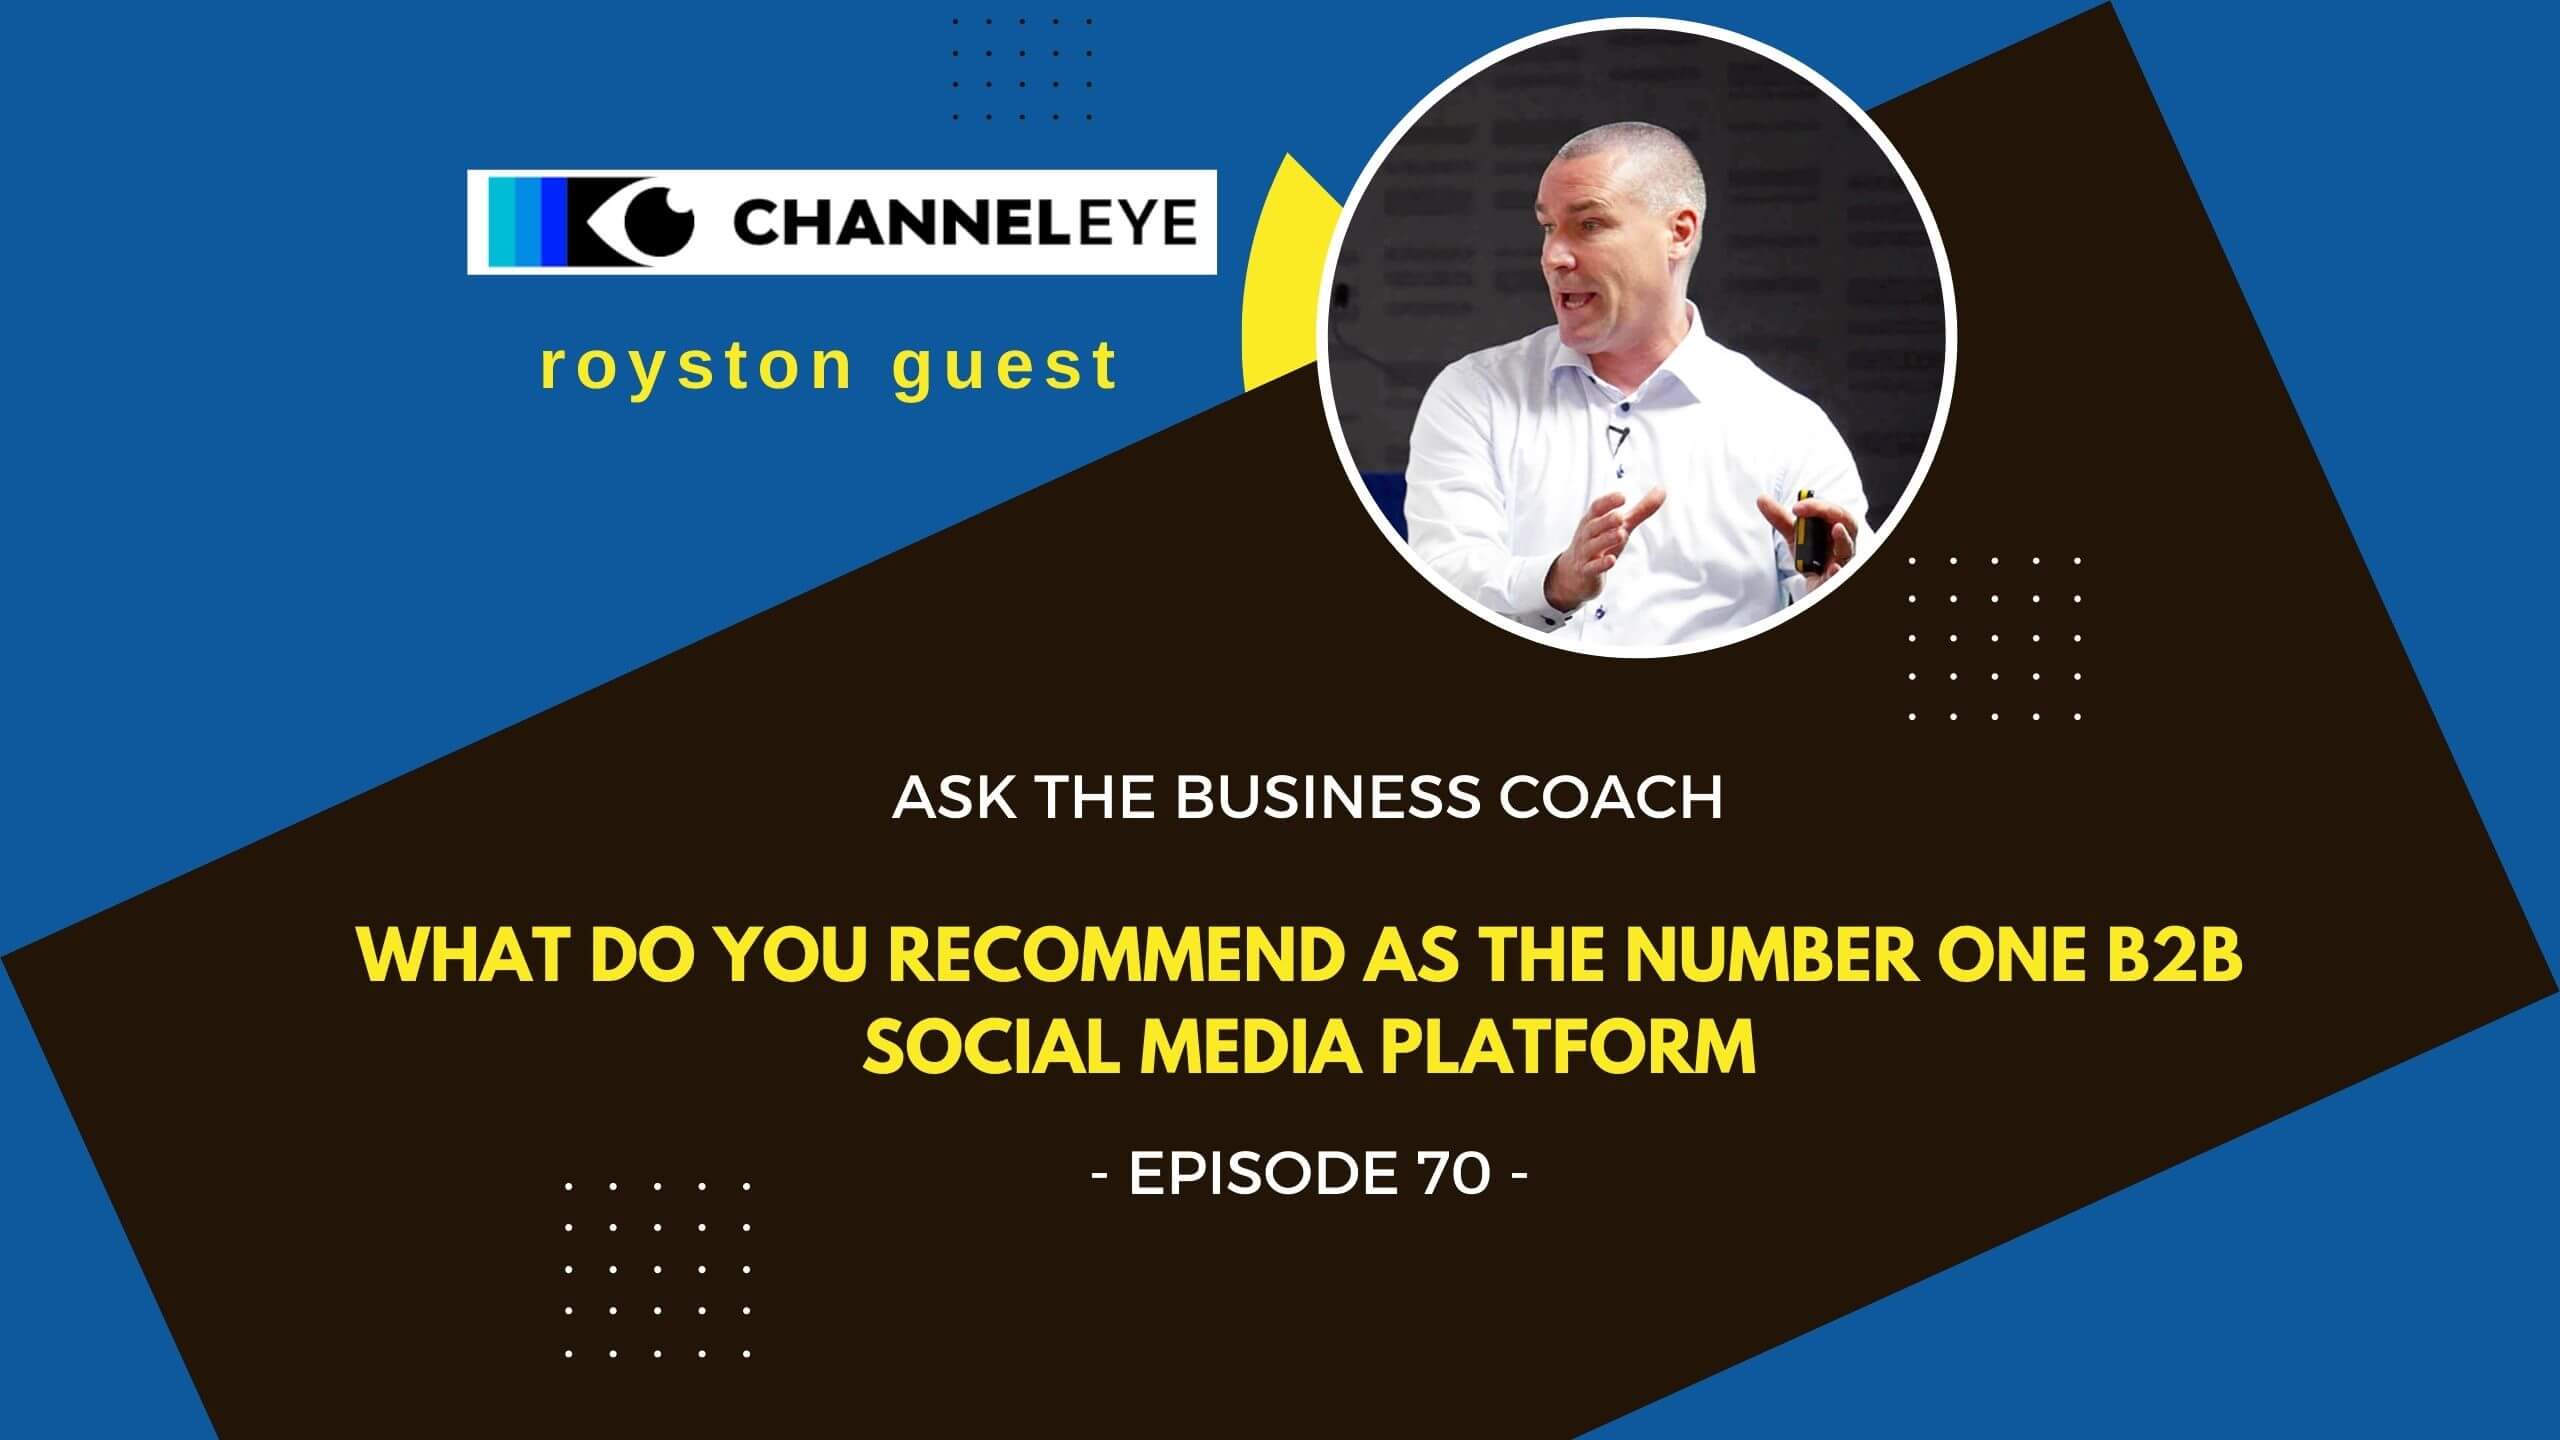 Ask The Business Coach Episode 70 What do you recommend as the number 1 B2B social media platform